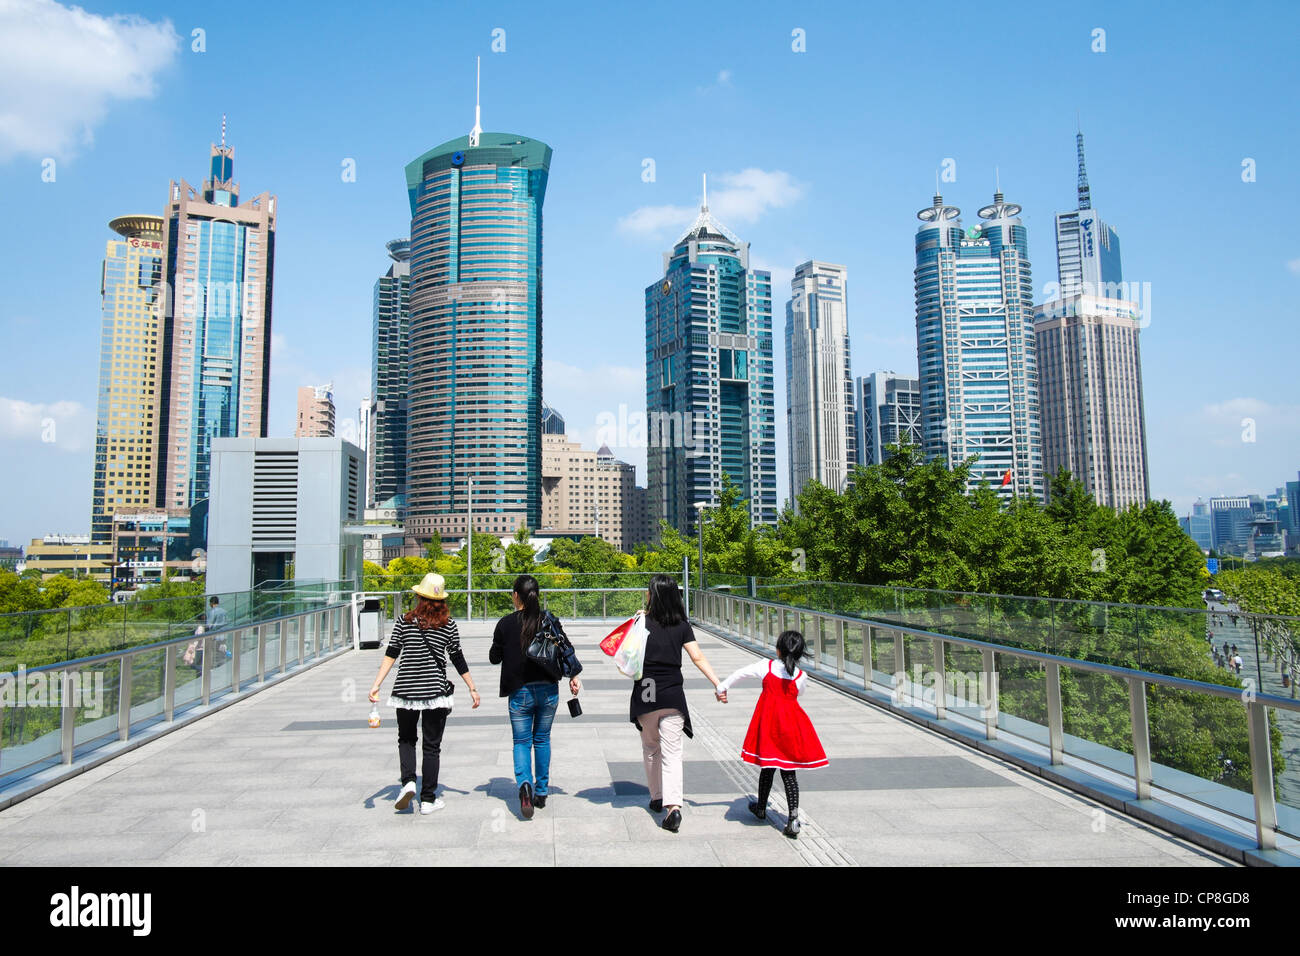 People walking on overhead walkway with skyline of skyscrapers in Lujiazui district of Pudong in Shanghai China Stock Photo